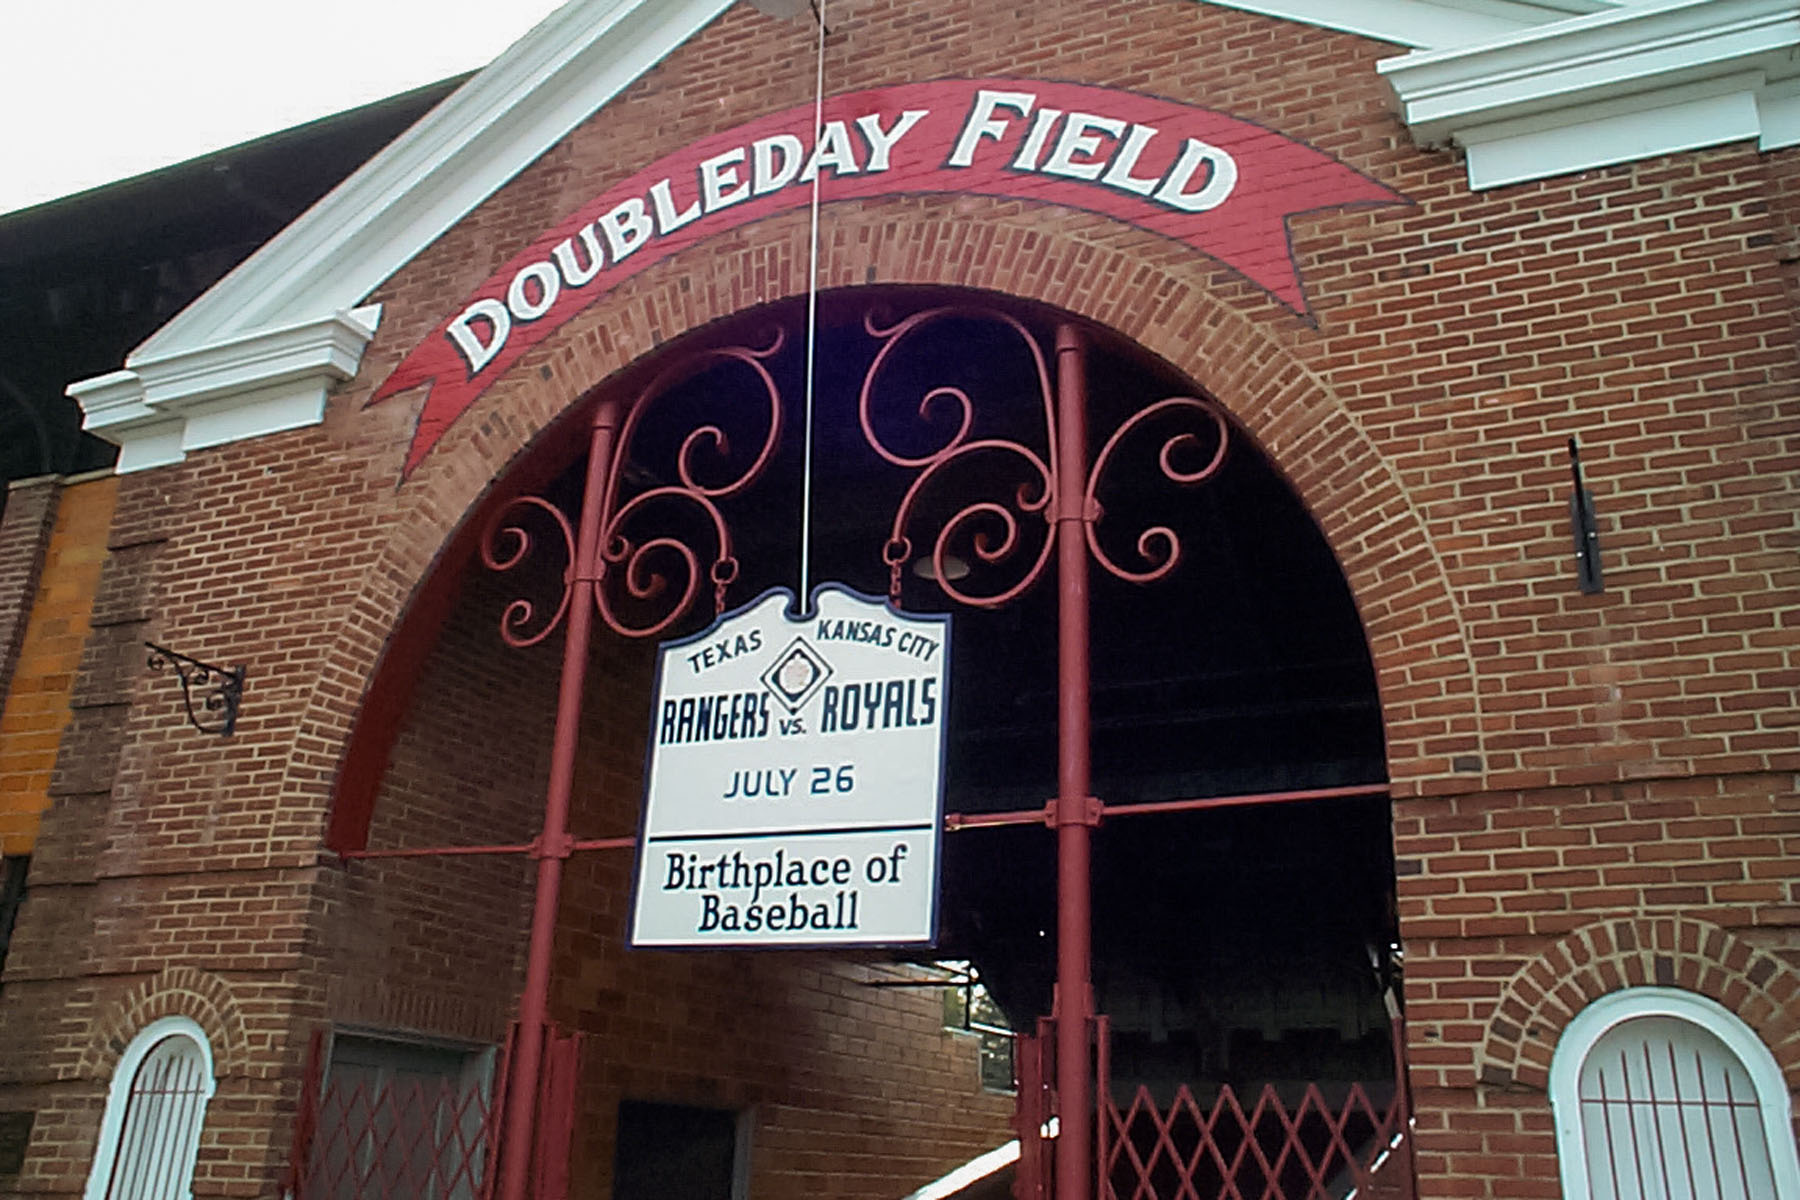 Doubleday Field, Cooperstown, NY, named for the man who did not invent baseball.  Click for next photo.